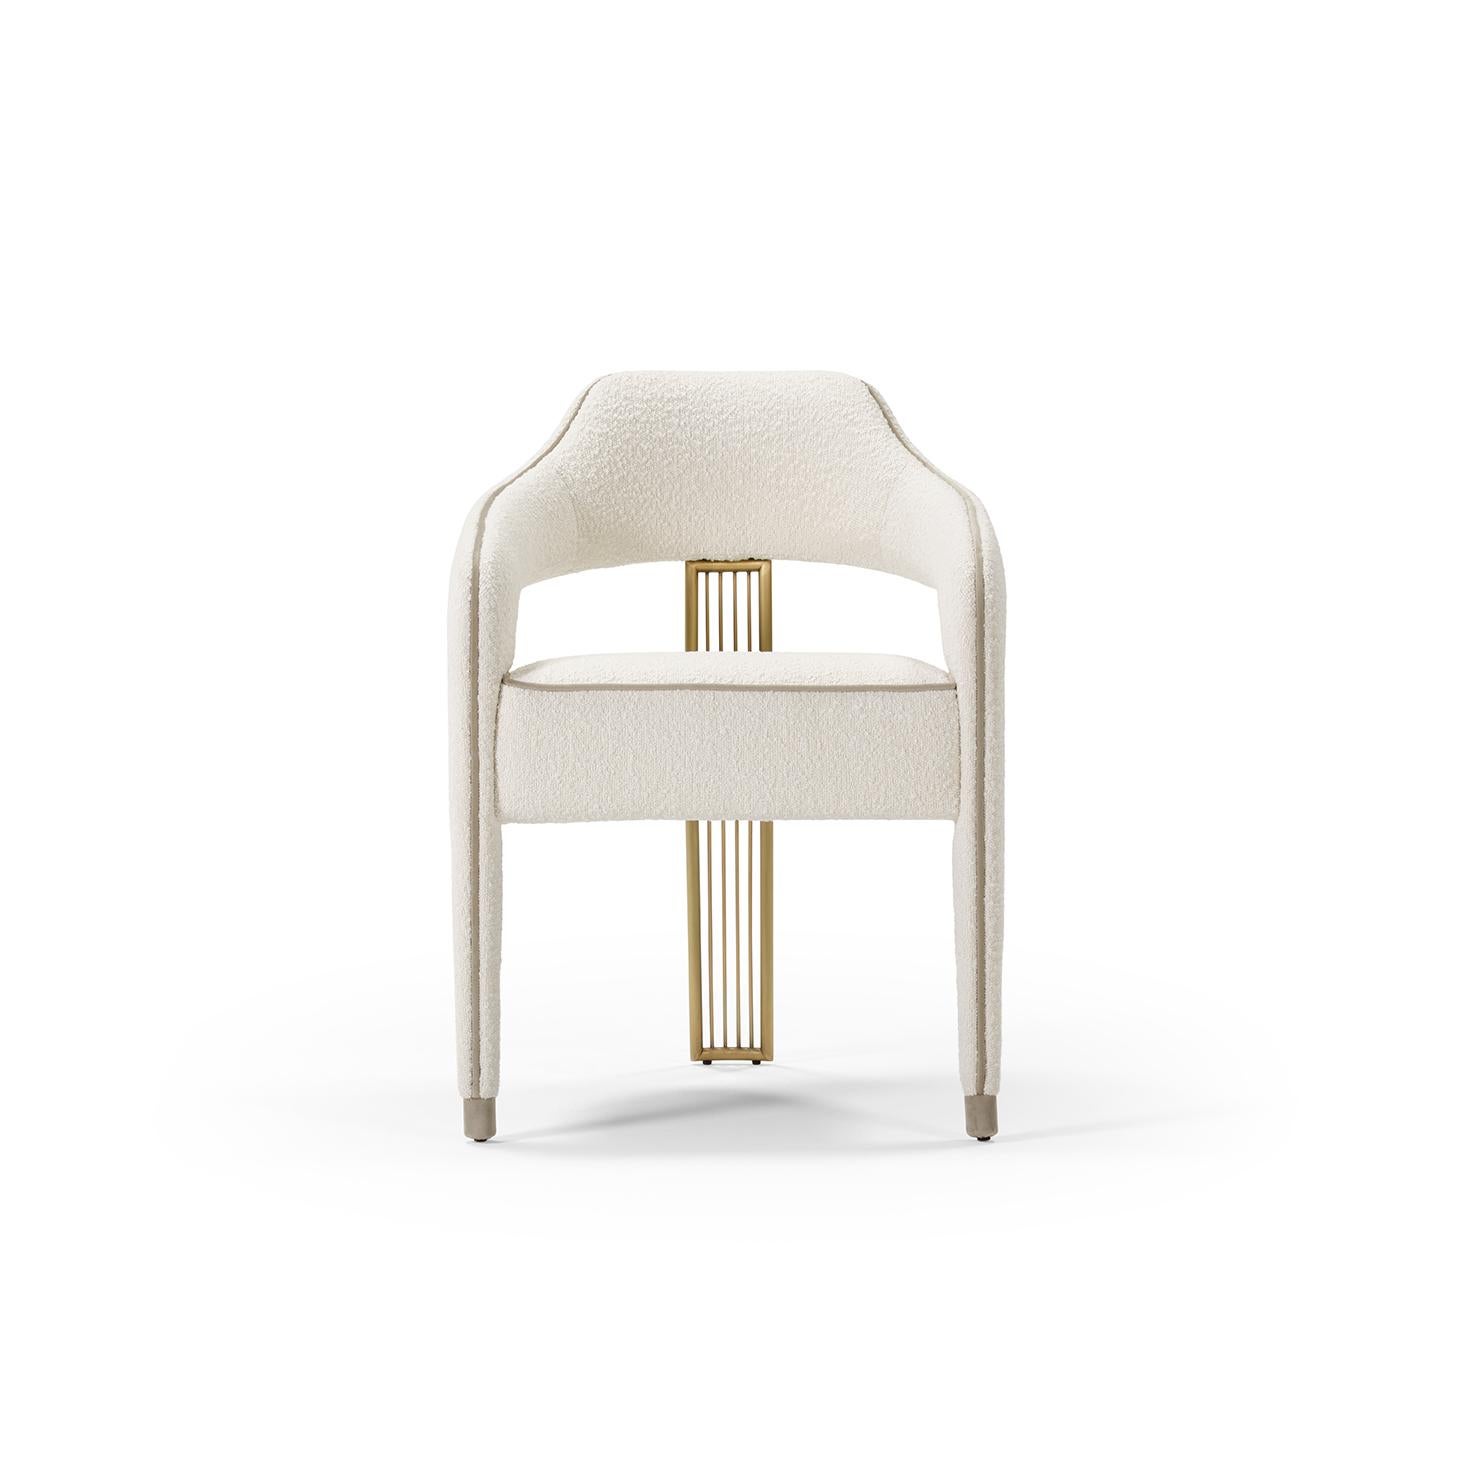 The INVICTA II dining chair has an exclusive and impressive design, with just one leg in the back, it brings shophistication to your decoration. Highlighted by the piping detail around the seat and the back that extends to the front legs. The rear